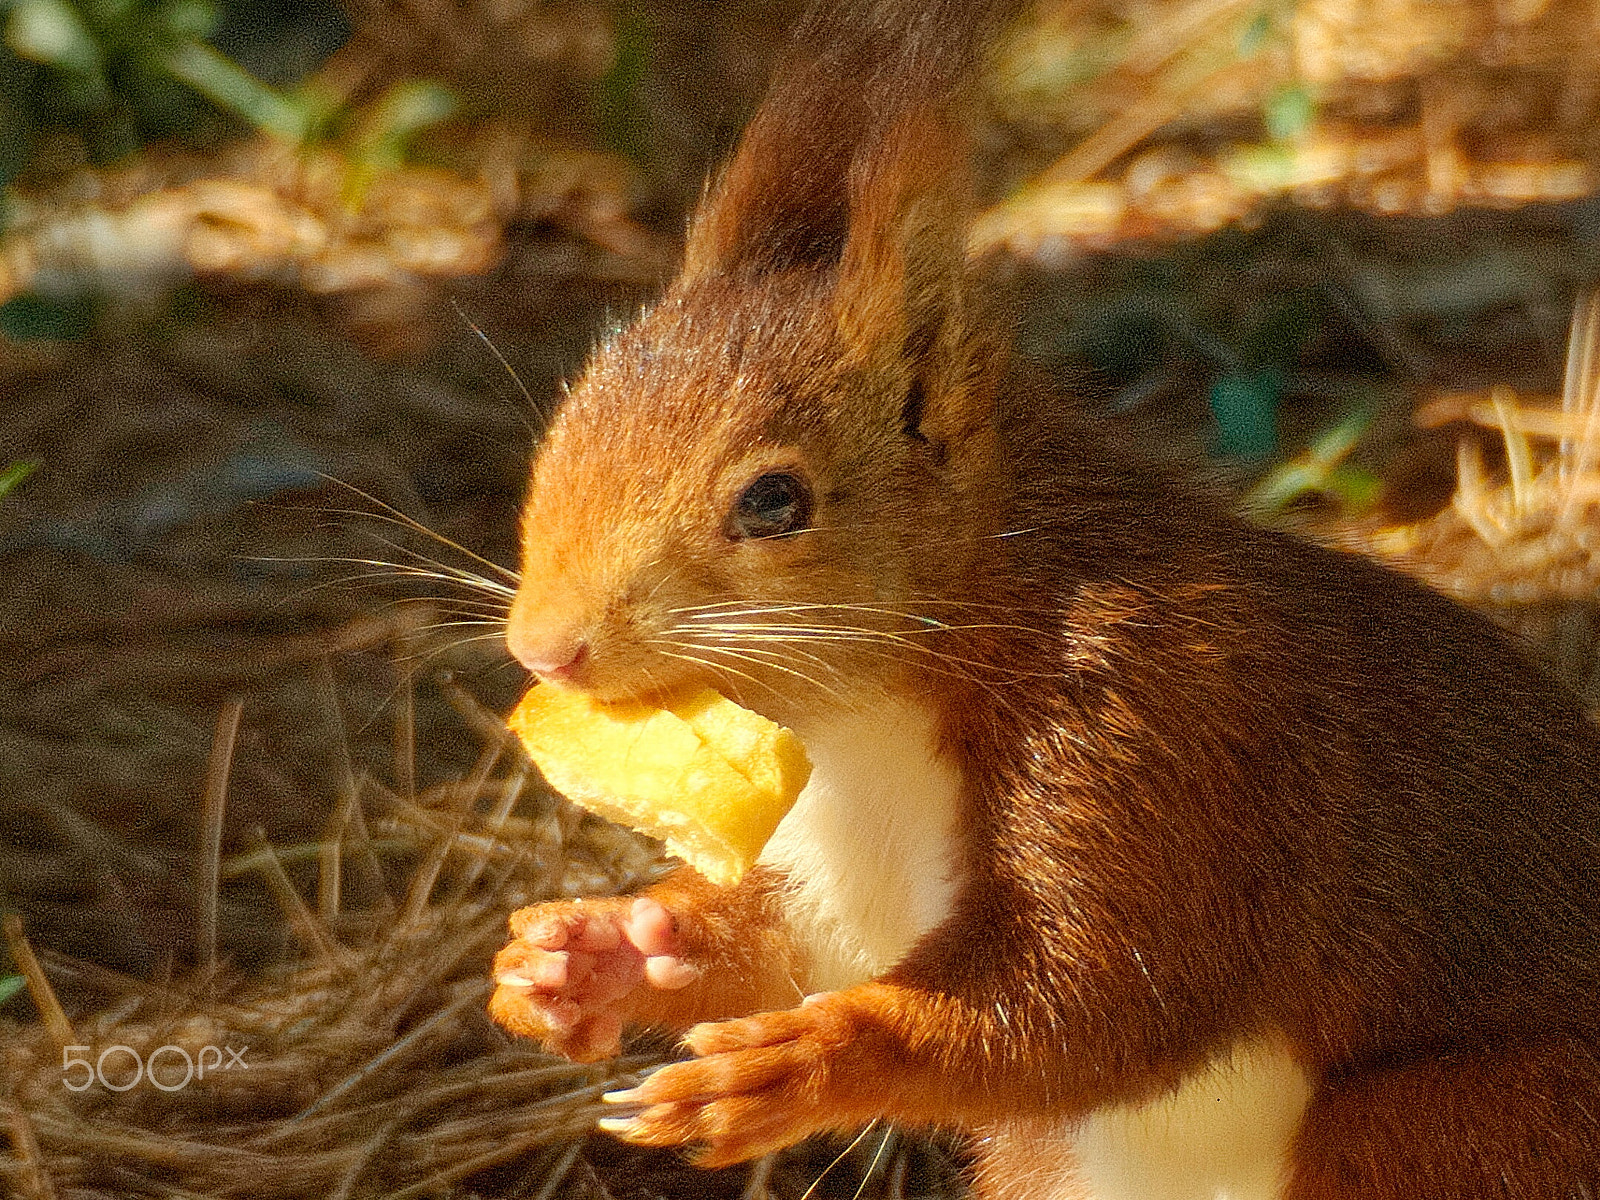 Built-in lens sample photo. Squirrel eating photography